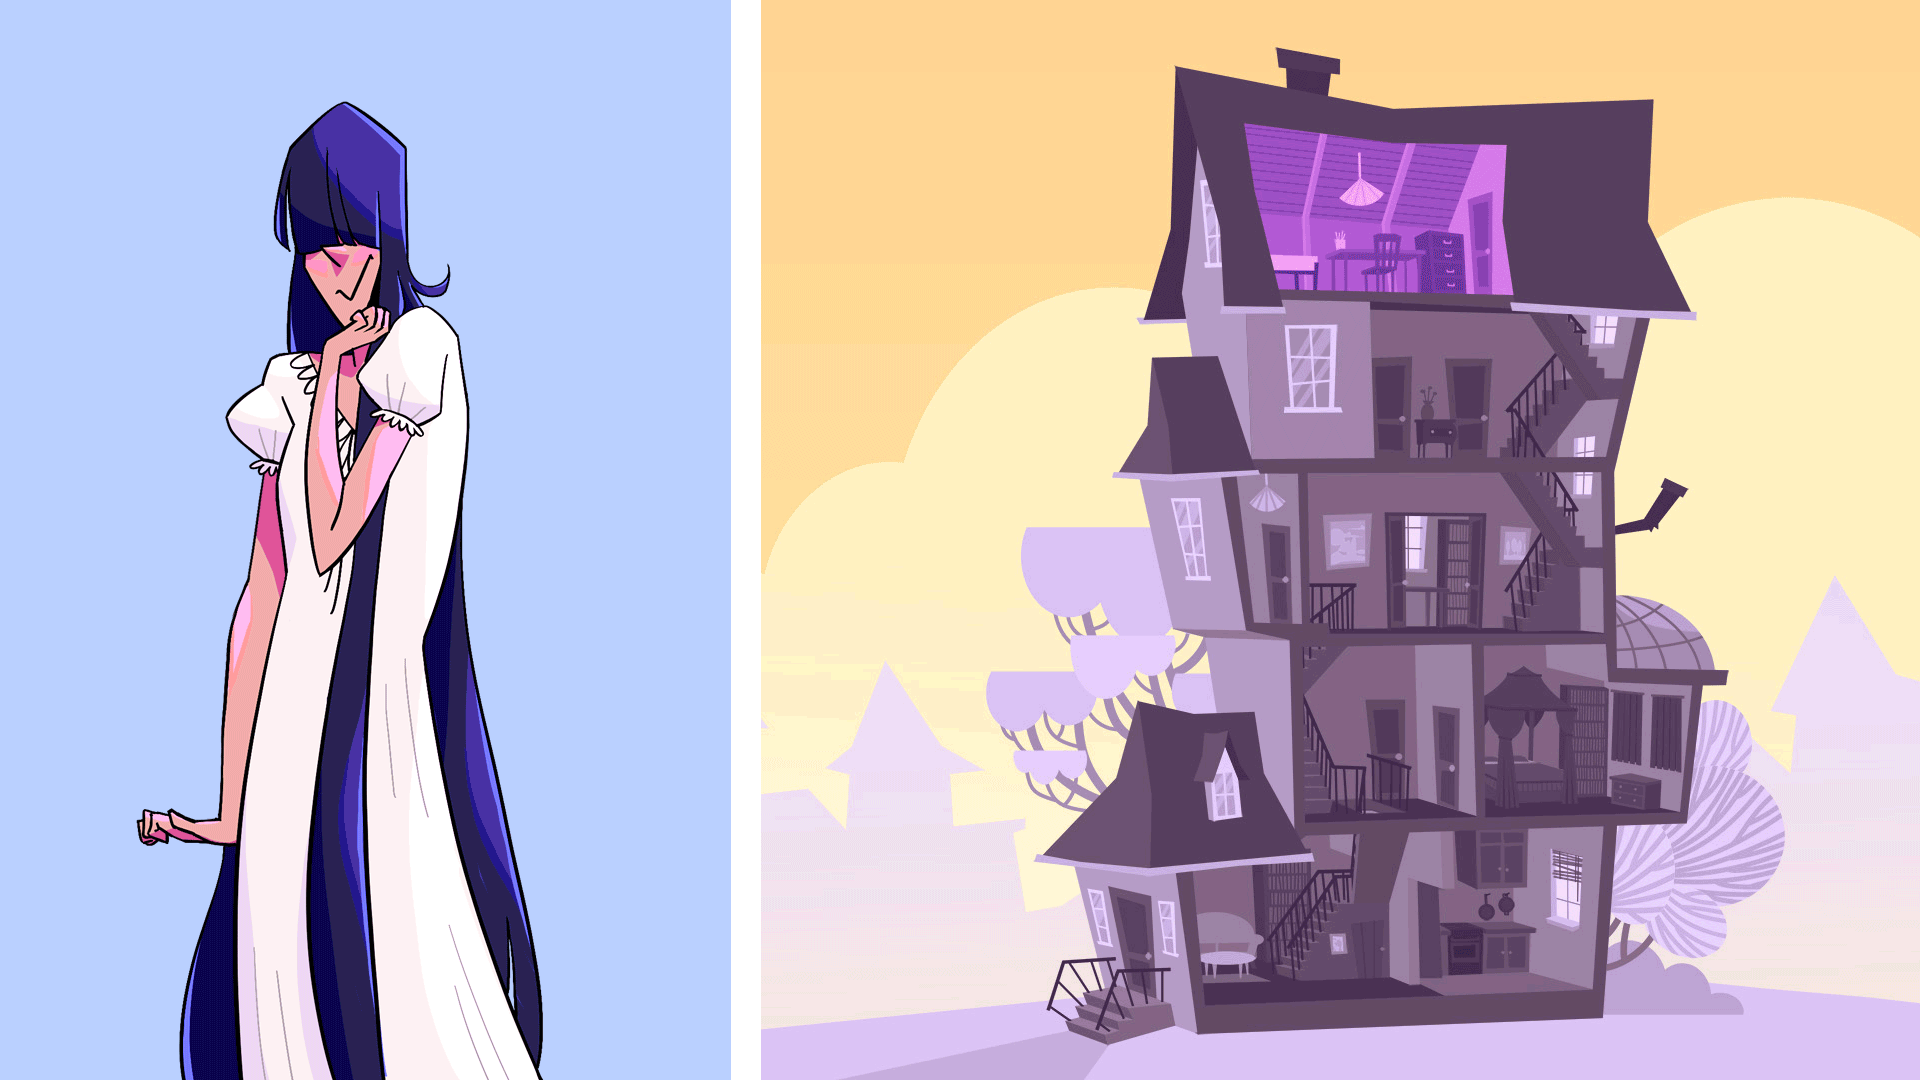 On the left, an animated GIF shows a girl with long blue hair and a white nightgown alternating between surprised, sneaky, pouty, and disappointed poses. On the right, various rooms light up in an illustrated cross-section of a tall and rickety house.